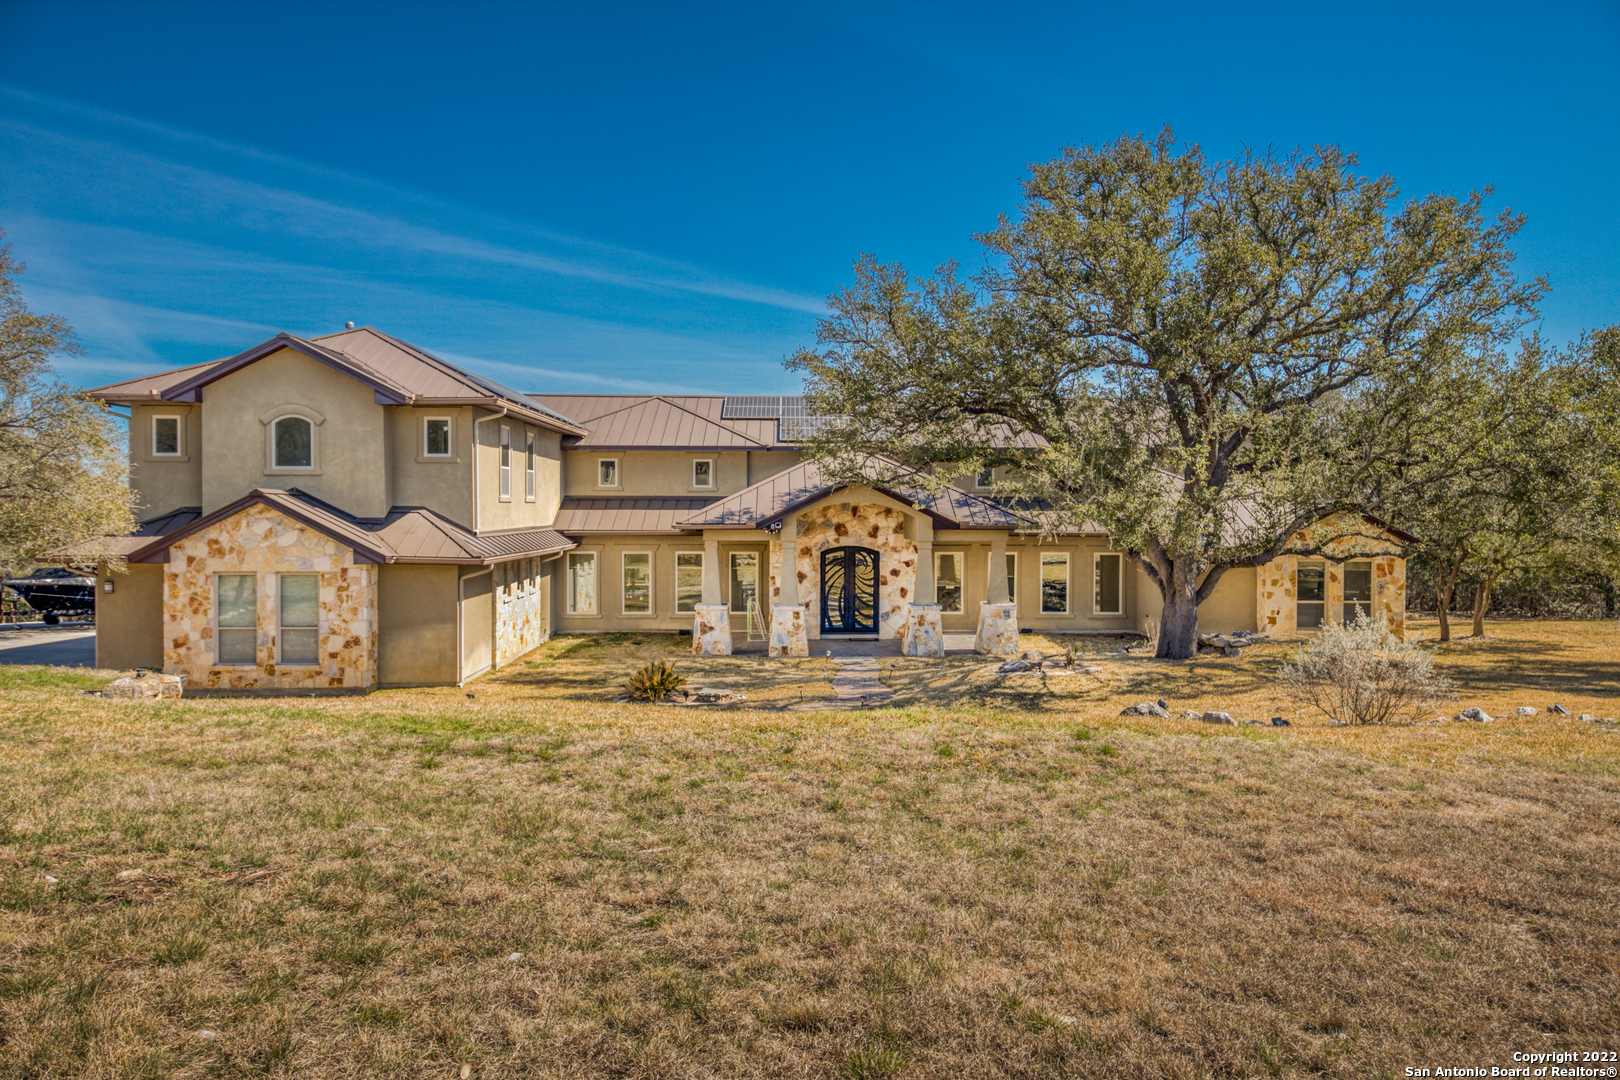 BIG PRICE IMPROVEMENT ON THIS BEAUTIFUL HOME!   Come view this Beautiful, contemporary, well kept home in the heart of the hill country in person! This unique home sits on 13 Acres, 6 bedrooms, 5 baths, open floor plan with high ceilings, beautiful kitchen, grant counter tops and built in fridge. Primary bedroom does have an upstairs office with  Custom Built in shelving, private gym and huge primary bath. This home has a zip line installed from the park, to the gorgeous pool, outdoor patio area is your private oasis ready for family gatherings and memories. This home is equipped with solar panels, a irrigation system, one year old A/C  and so much more! Schedule your tour today!!